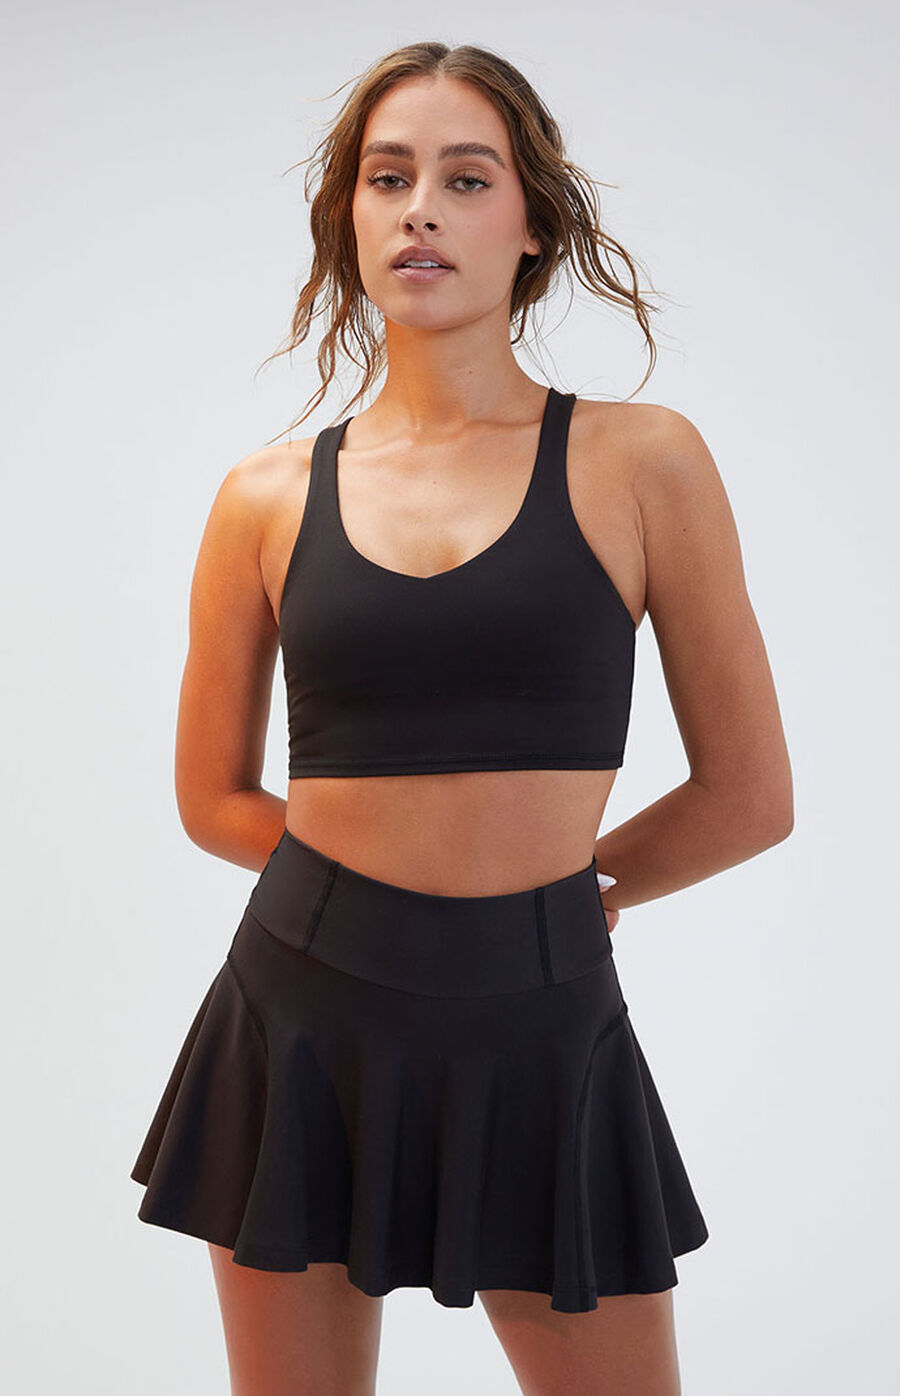 PAC 1980 PAC GLIDE Active Black Action Circle Skirt | PacSun